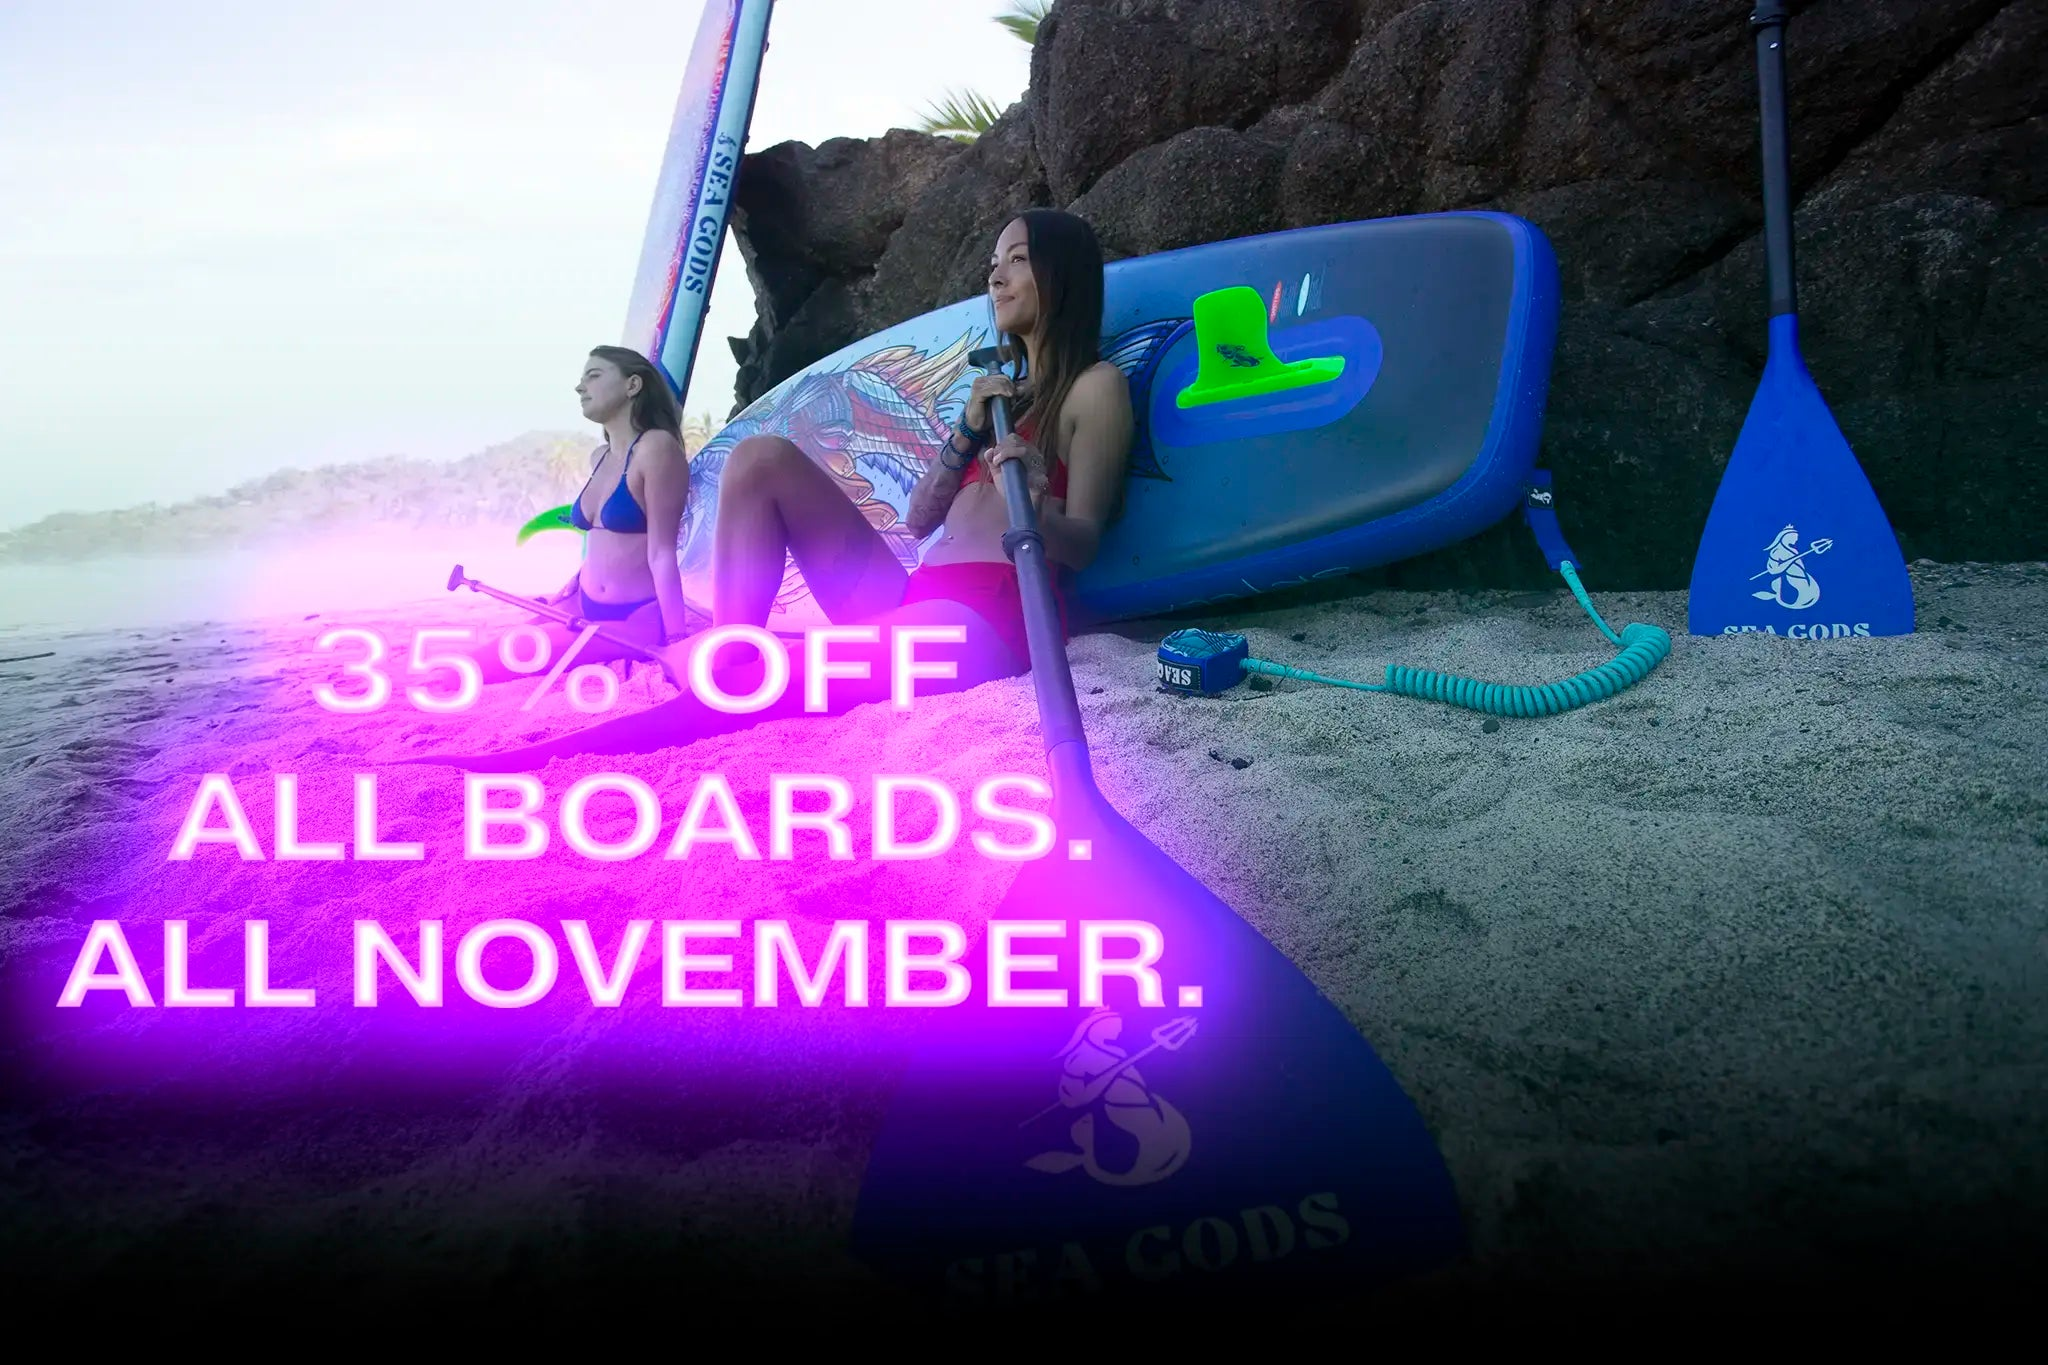 Sea gods stand up paddle boards black friday deals